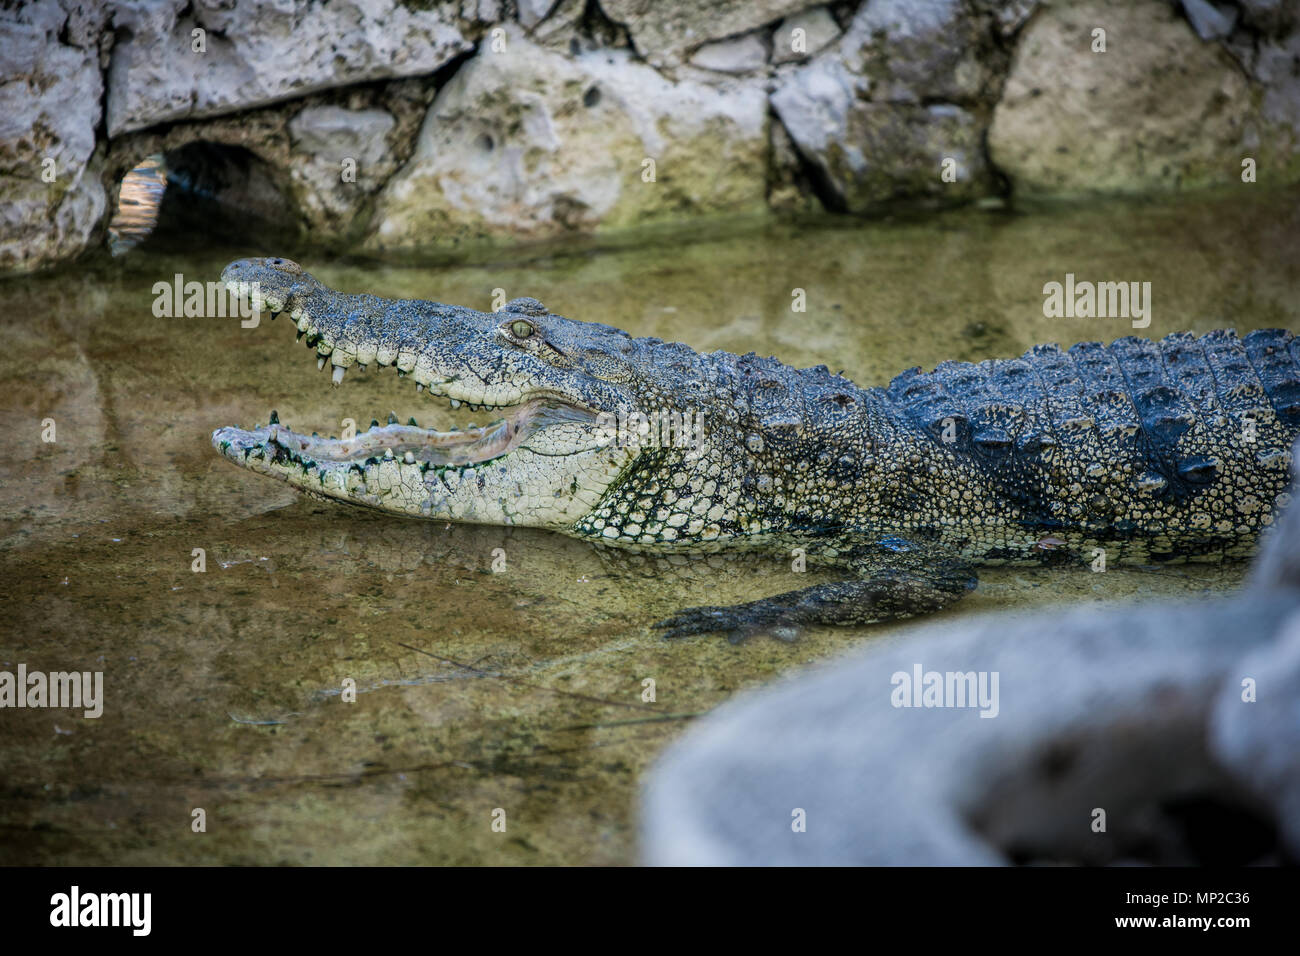 Crocodile with open mouth in water pond Stock Photo